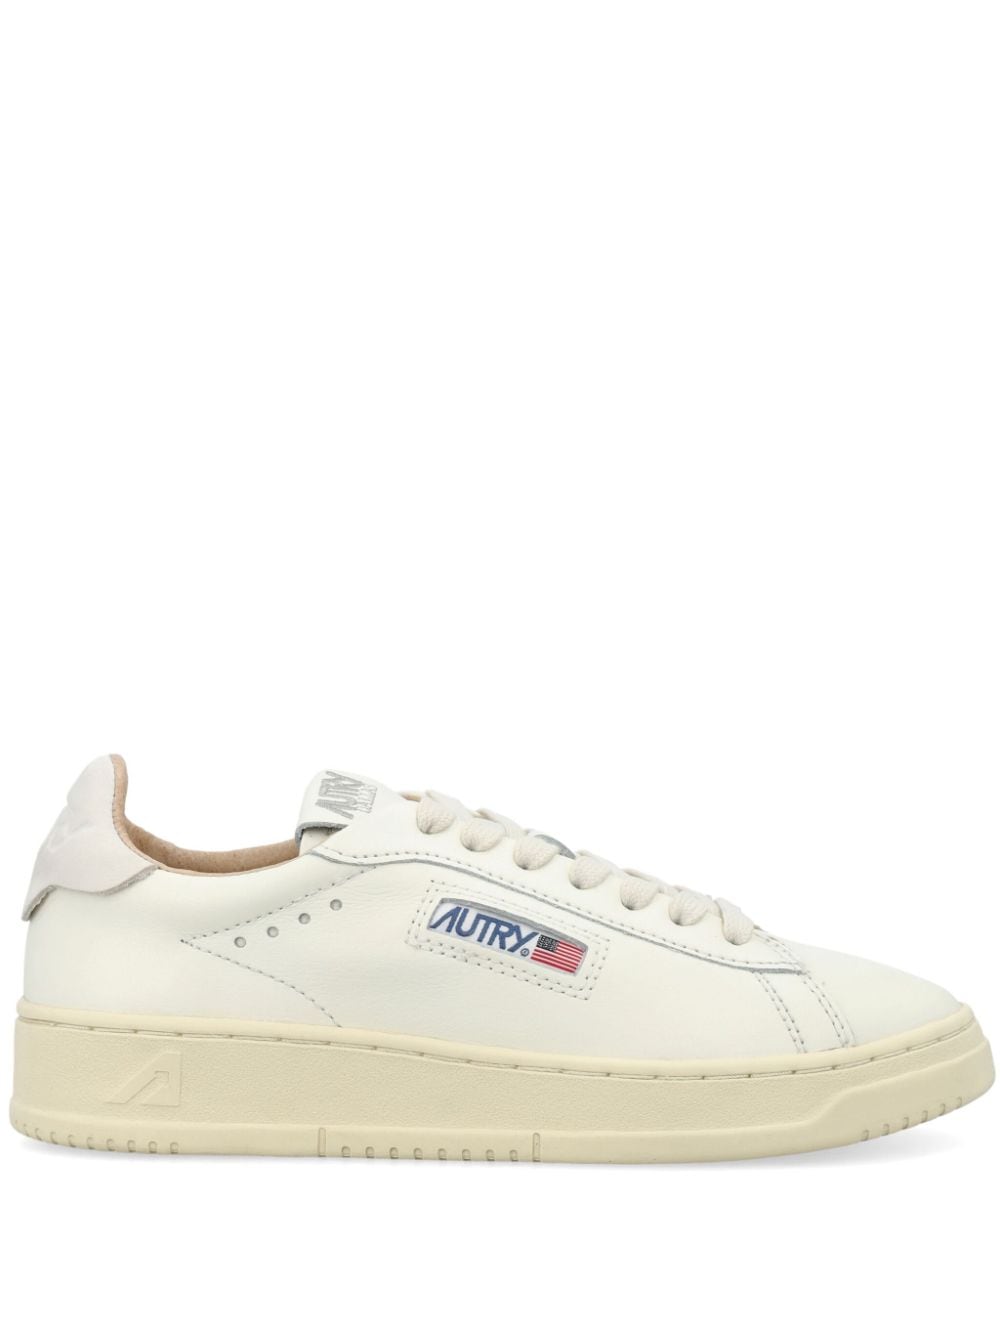 Autry Dallas Low leather sneakers White